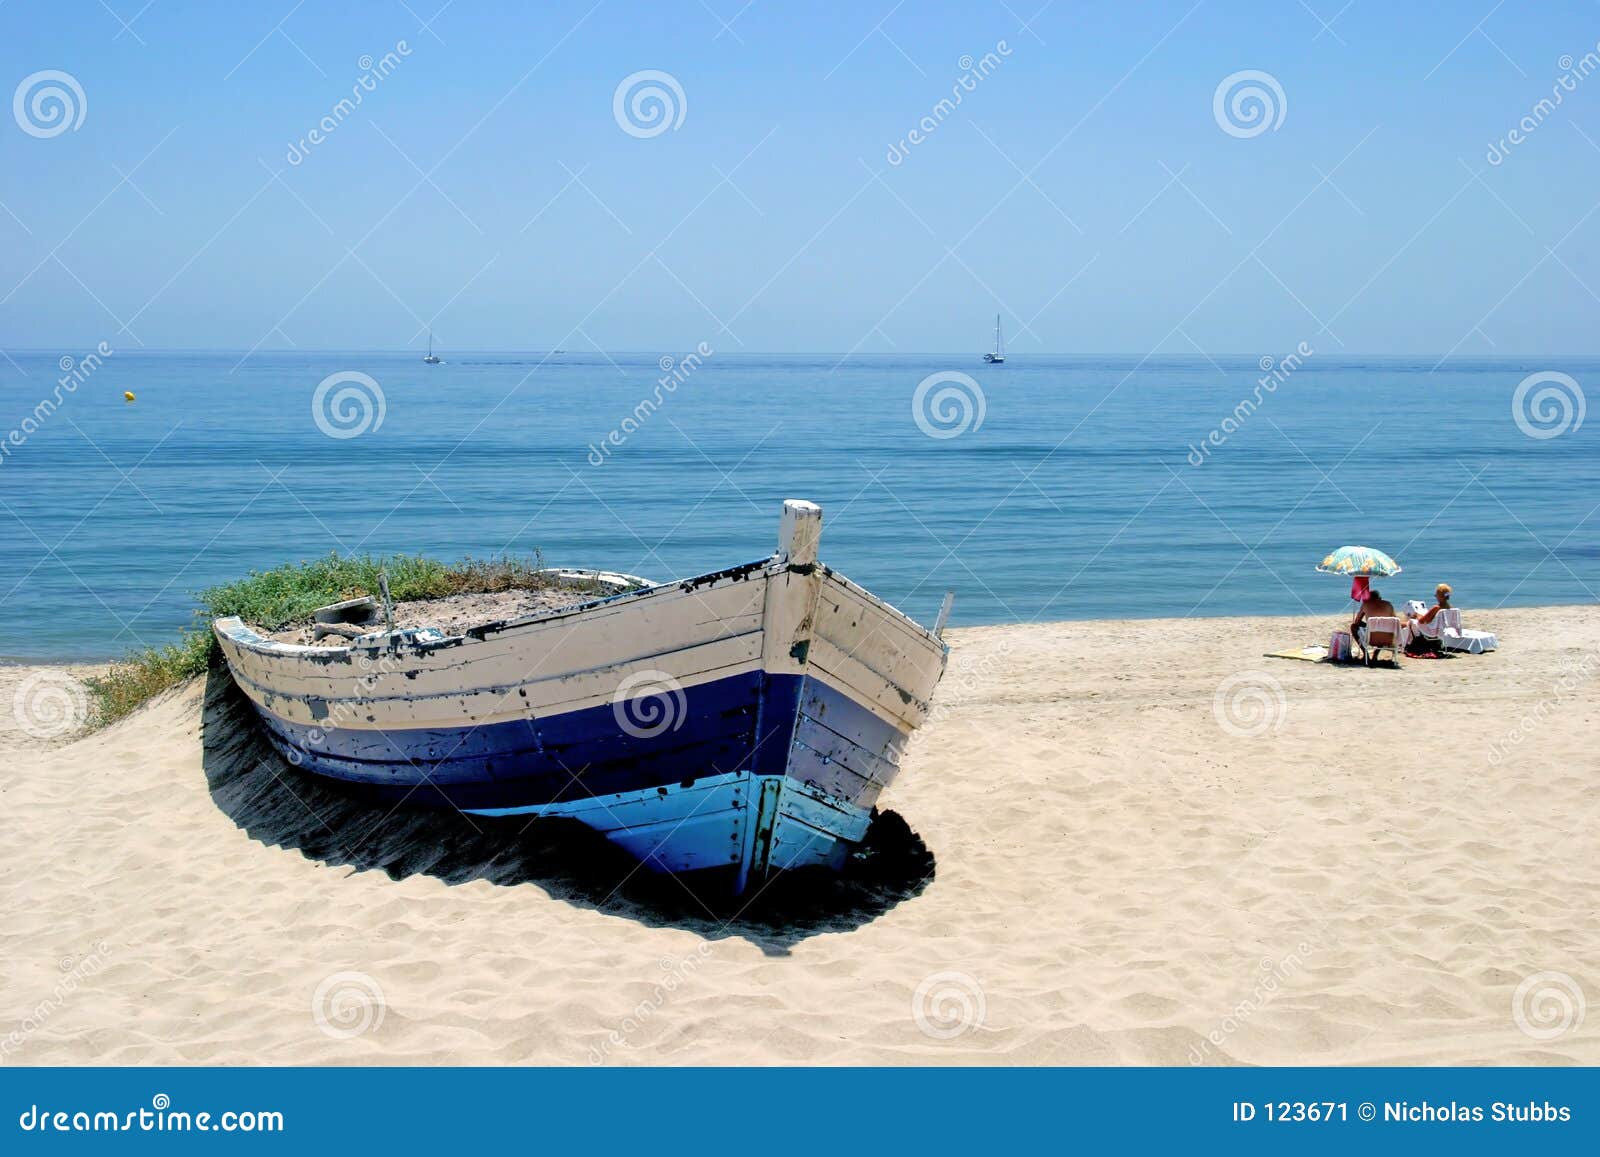 Old Rowing Boat On Sunny White Sandy Beach Stock Image 